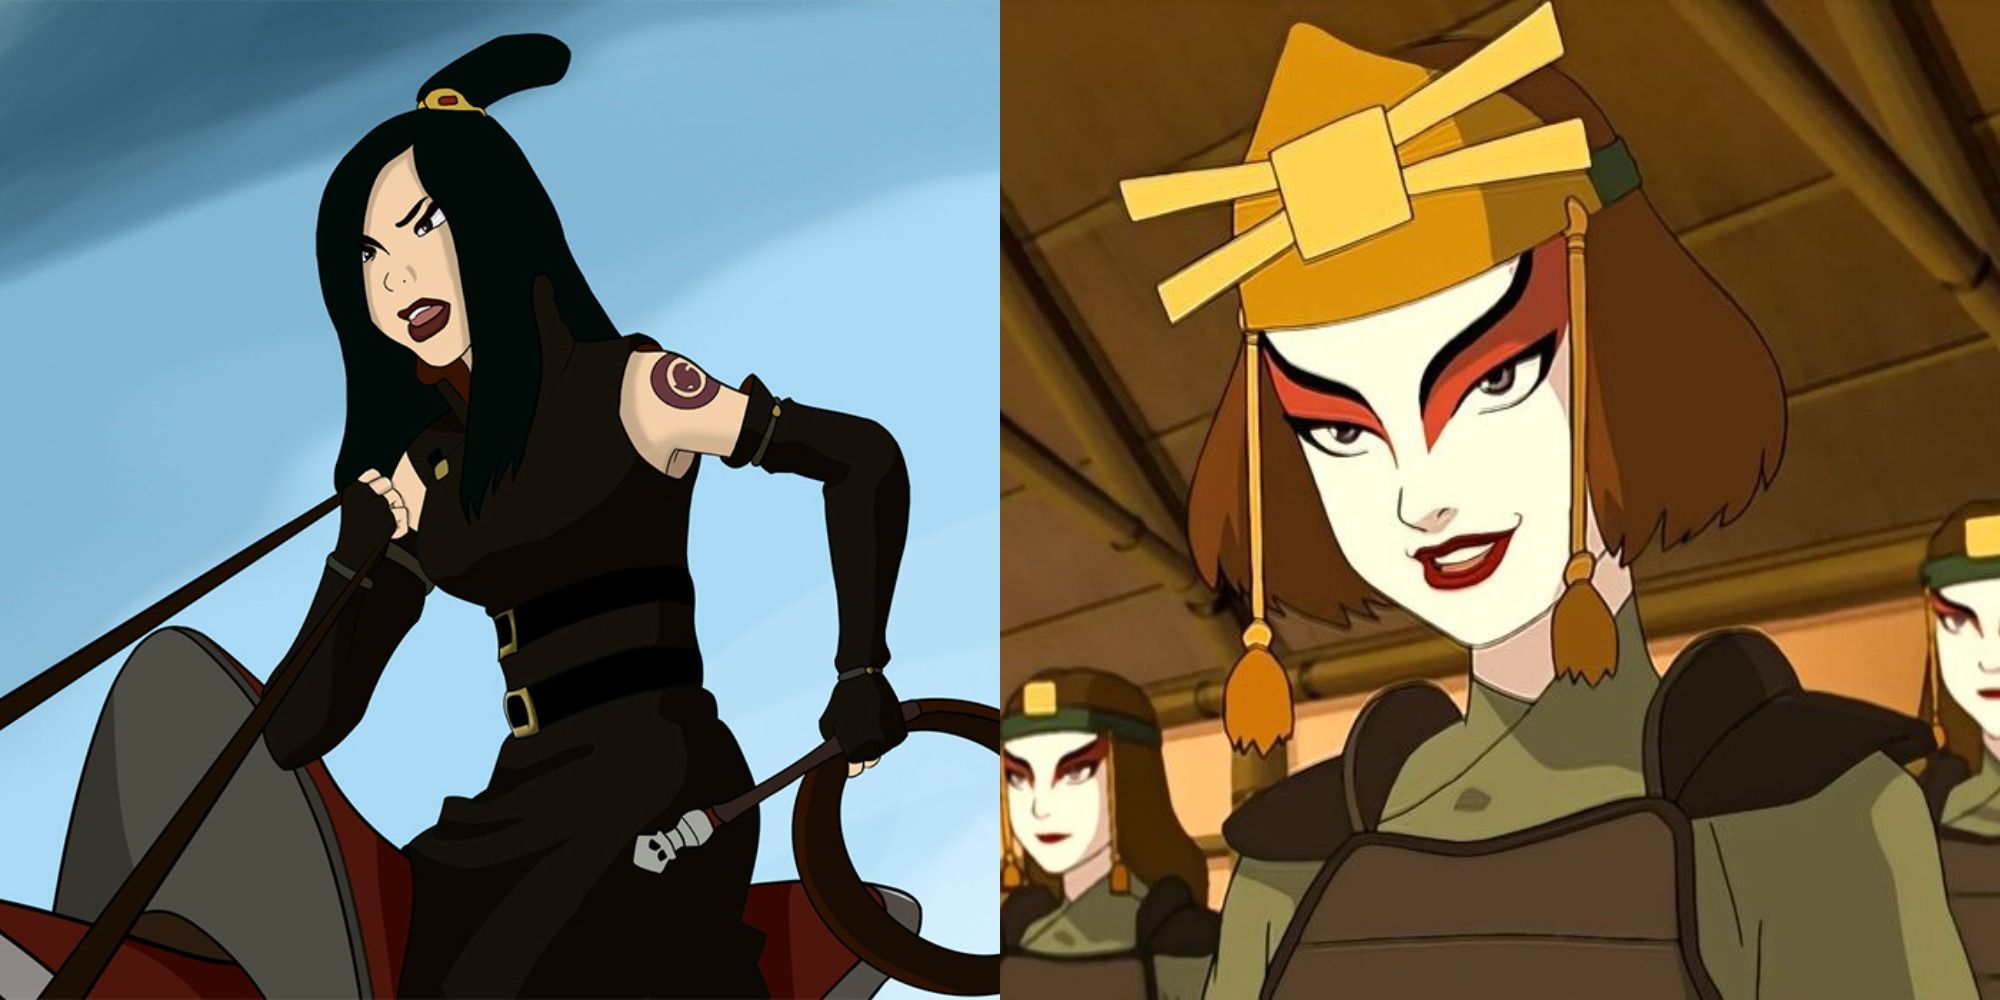 Split image of June and Suki from Avatar The Last Airbender.